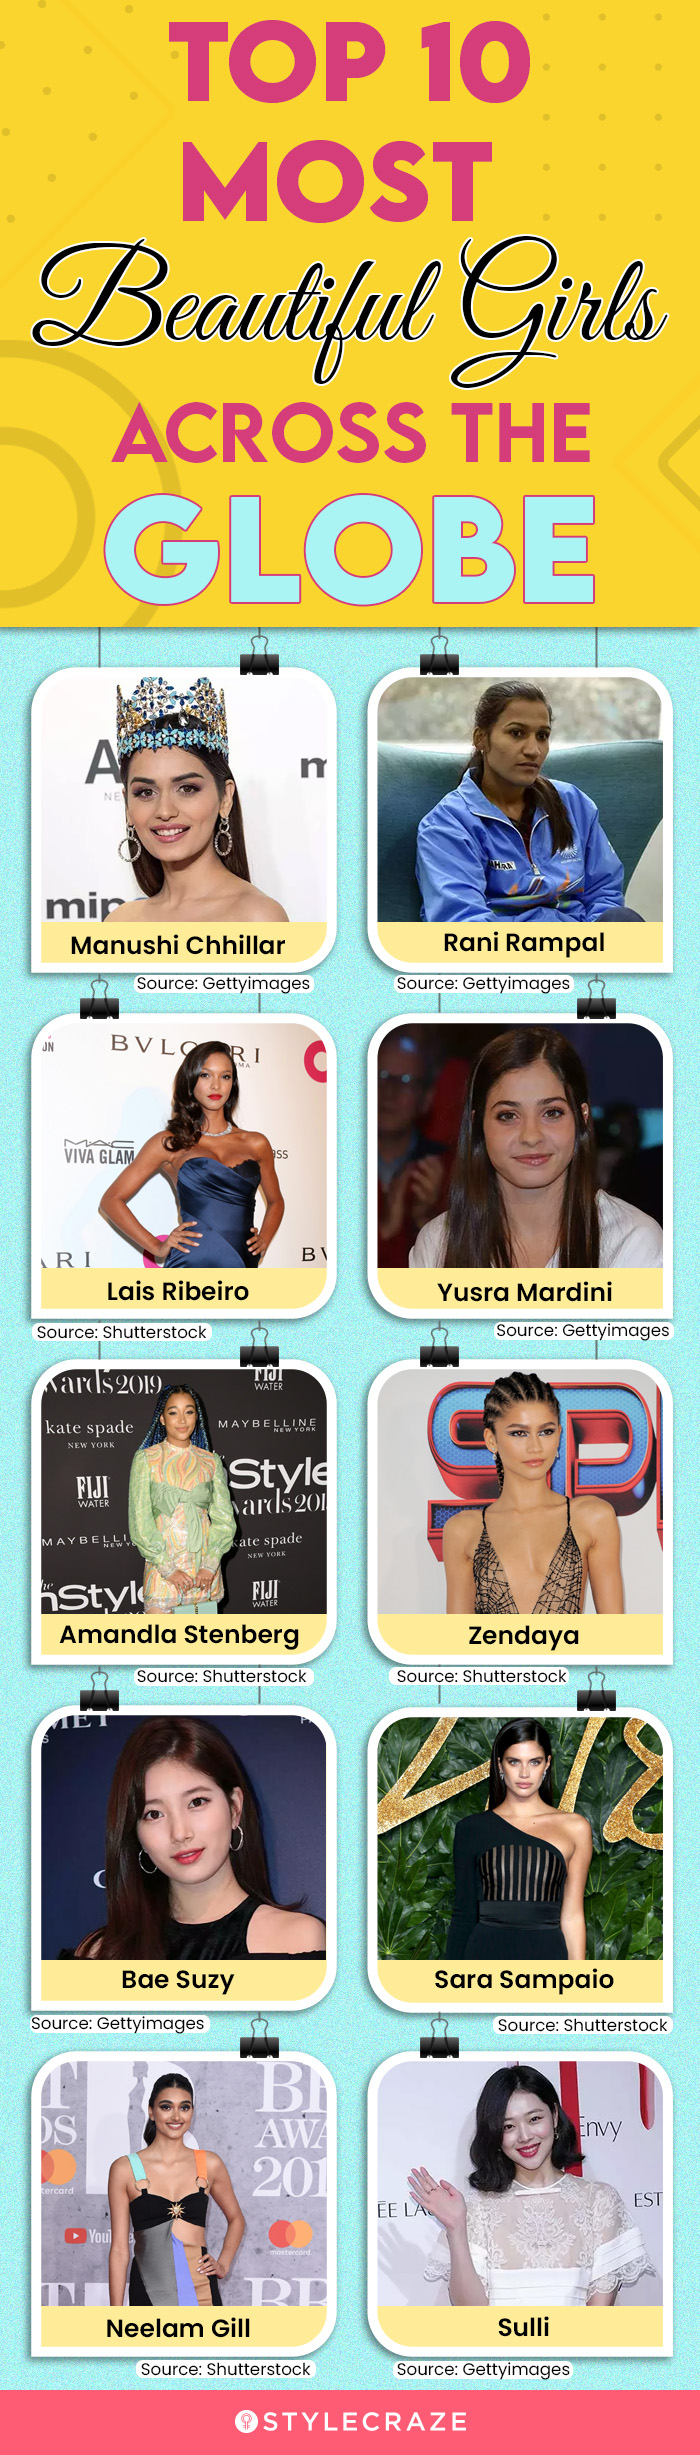 top 10 most beautiful girls across the globe (infographic)